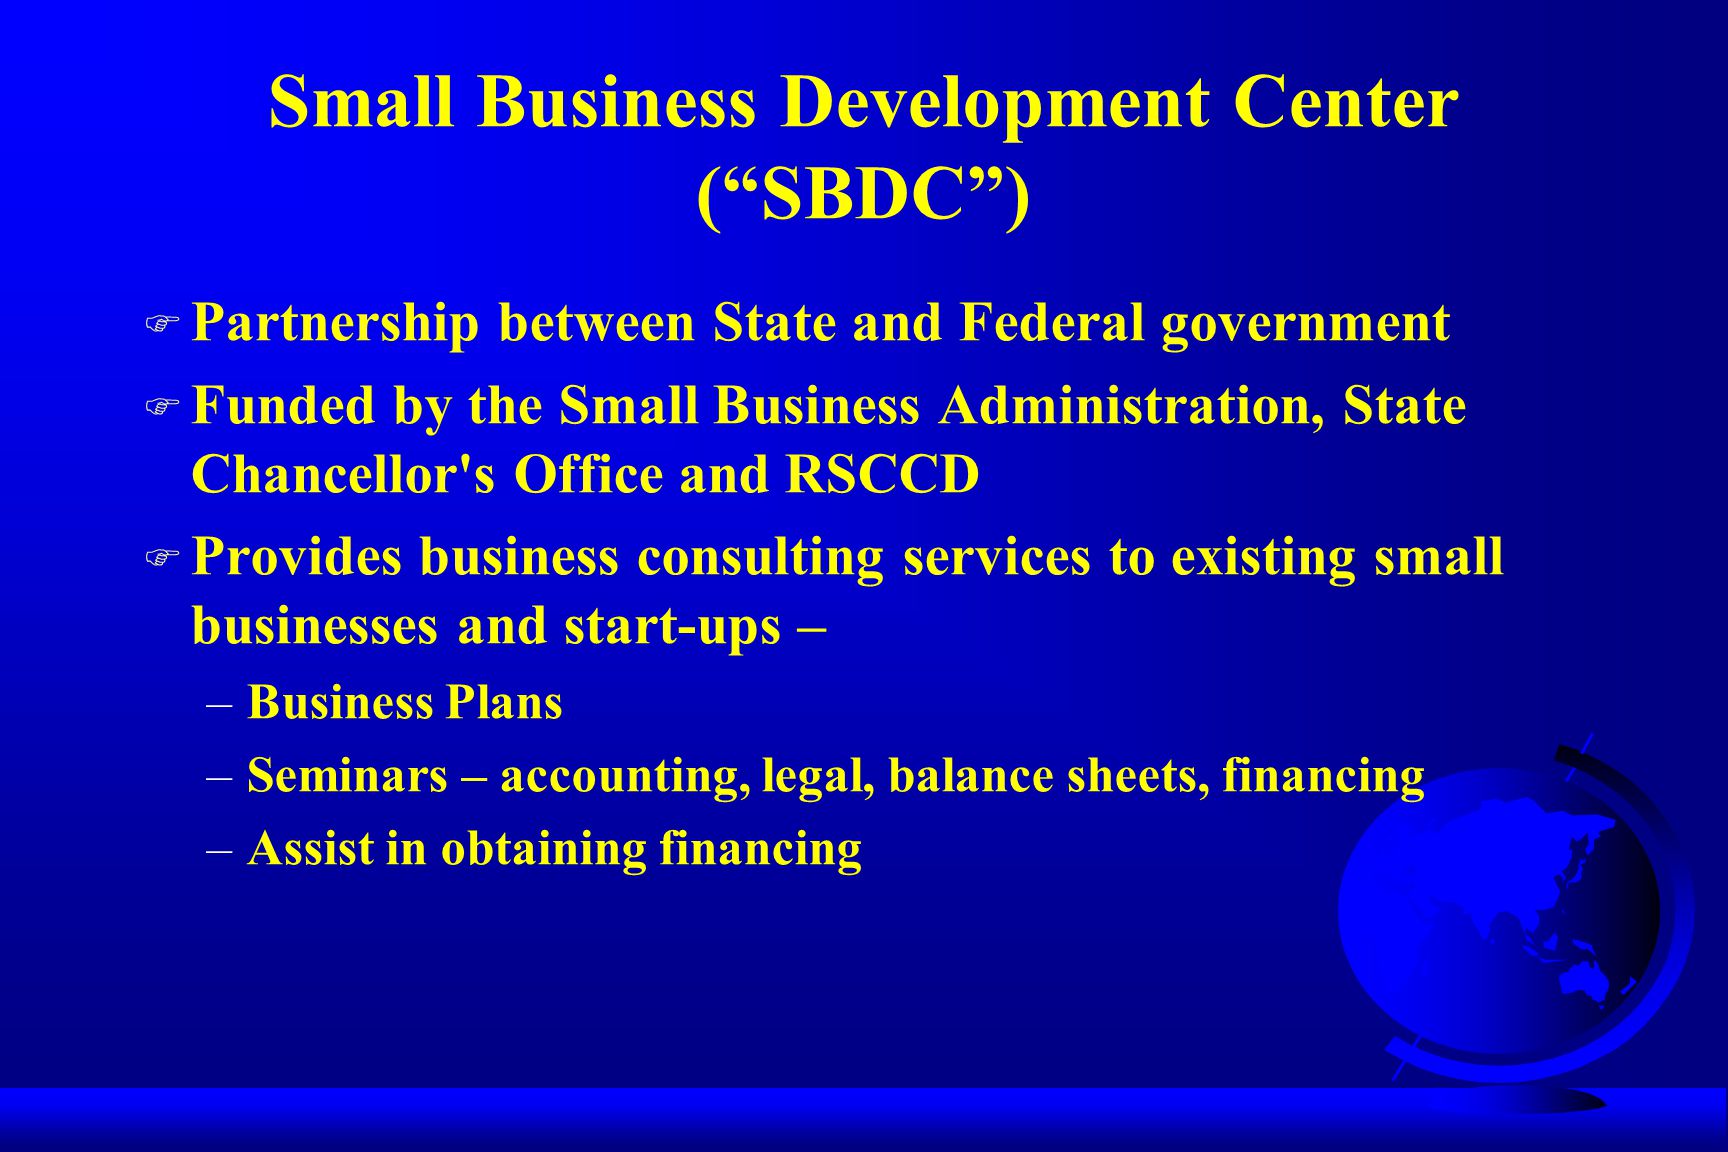 Small Business Development Center ( SBDC ) F Partnership between State and Federal government F Funded by the Small Business Administration, State Chancellor s Office and RSCCD F Provides business consulting services to existing small businesses and start-ups – –Business Plans –Seminars – accounting, legal, balance sheets, financing –Assist in obtaining financing